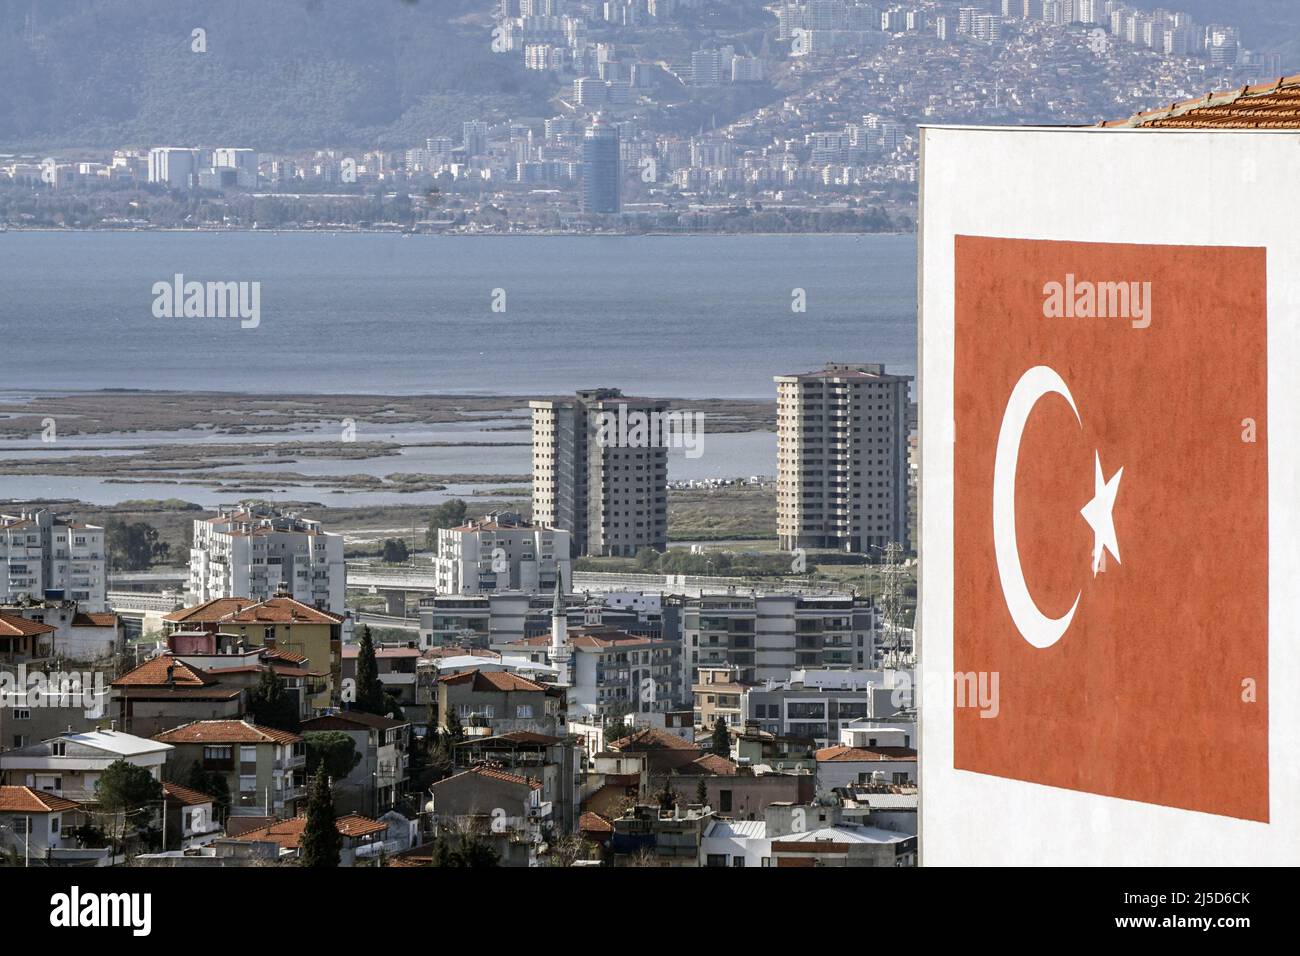 Izmir, Turkey, 20.03.2022 - A large Turkish flag is displayed on the wall of a house in Izmir. The Turkish economy grew strongly in 2021 at eleven percent. However, the economy faces a difficult year in 2022 due to high inflation and the Ukraine war. [automated translation] Stock Photo